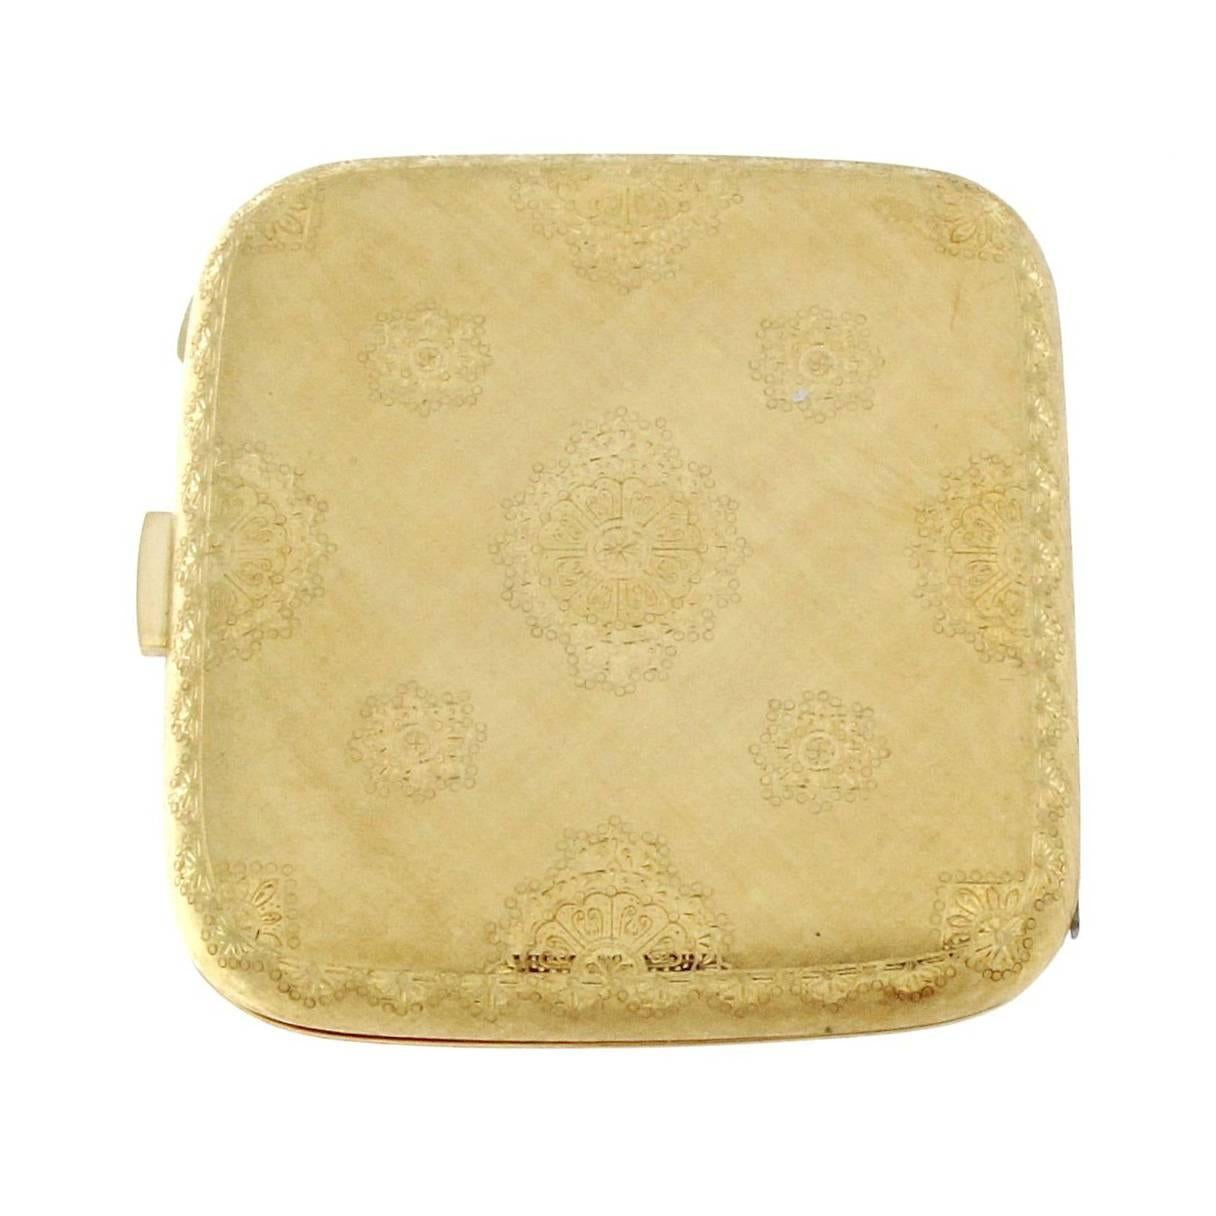 Gold Compact with Refined and Elegant Engravings